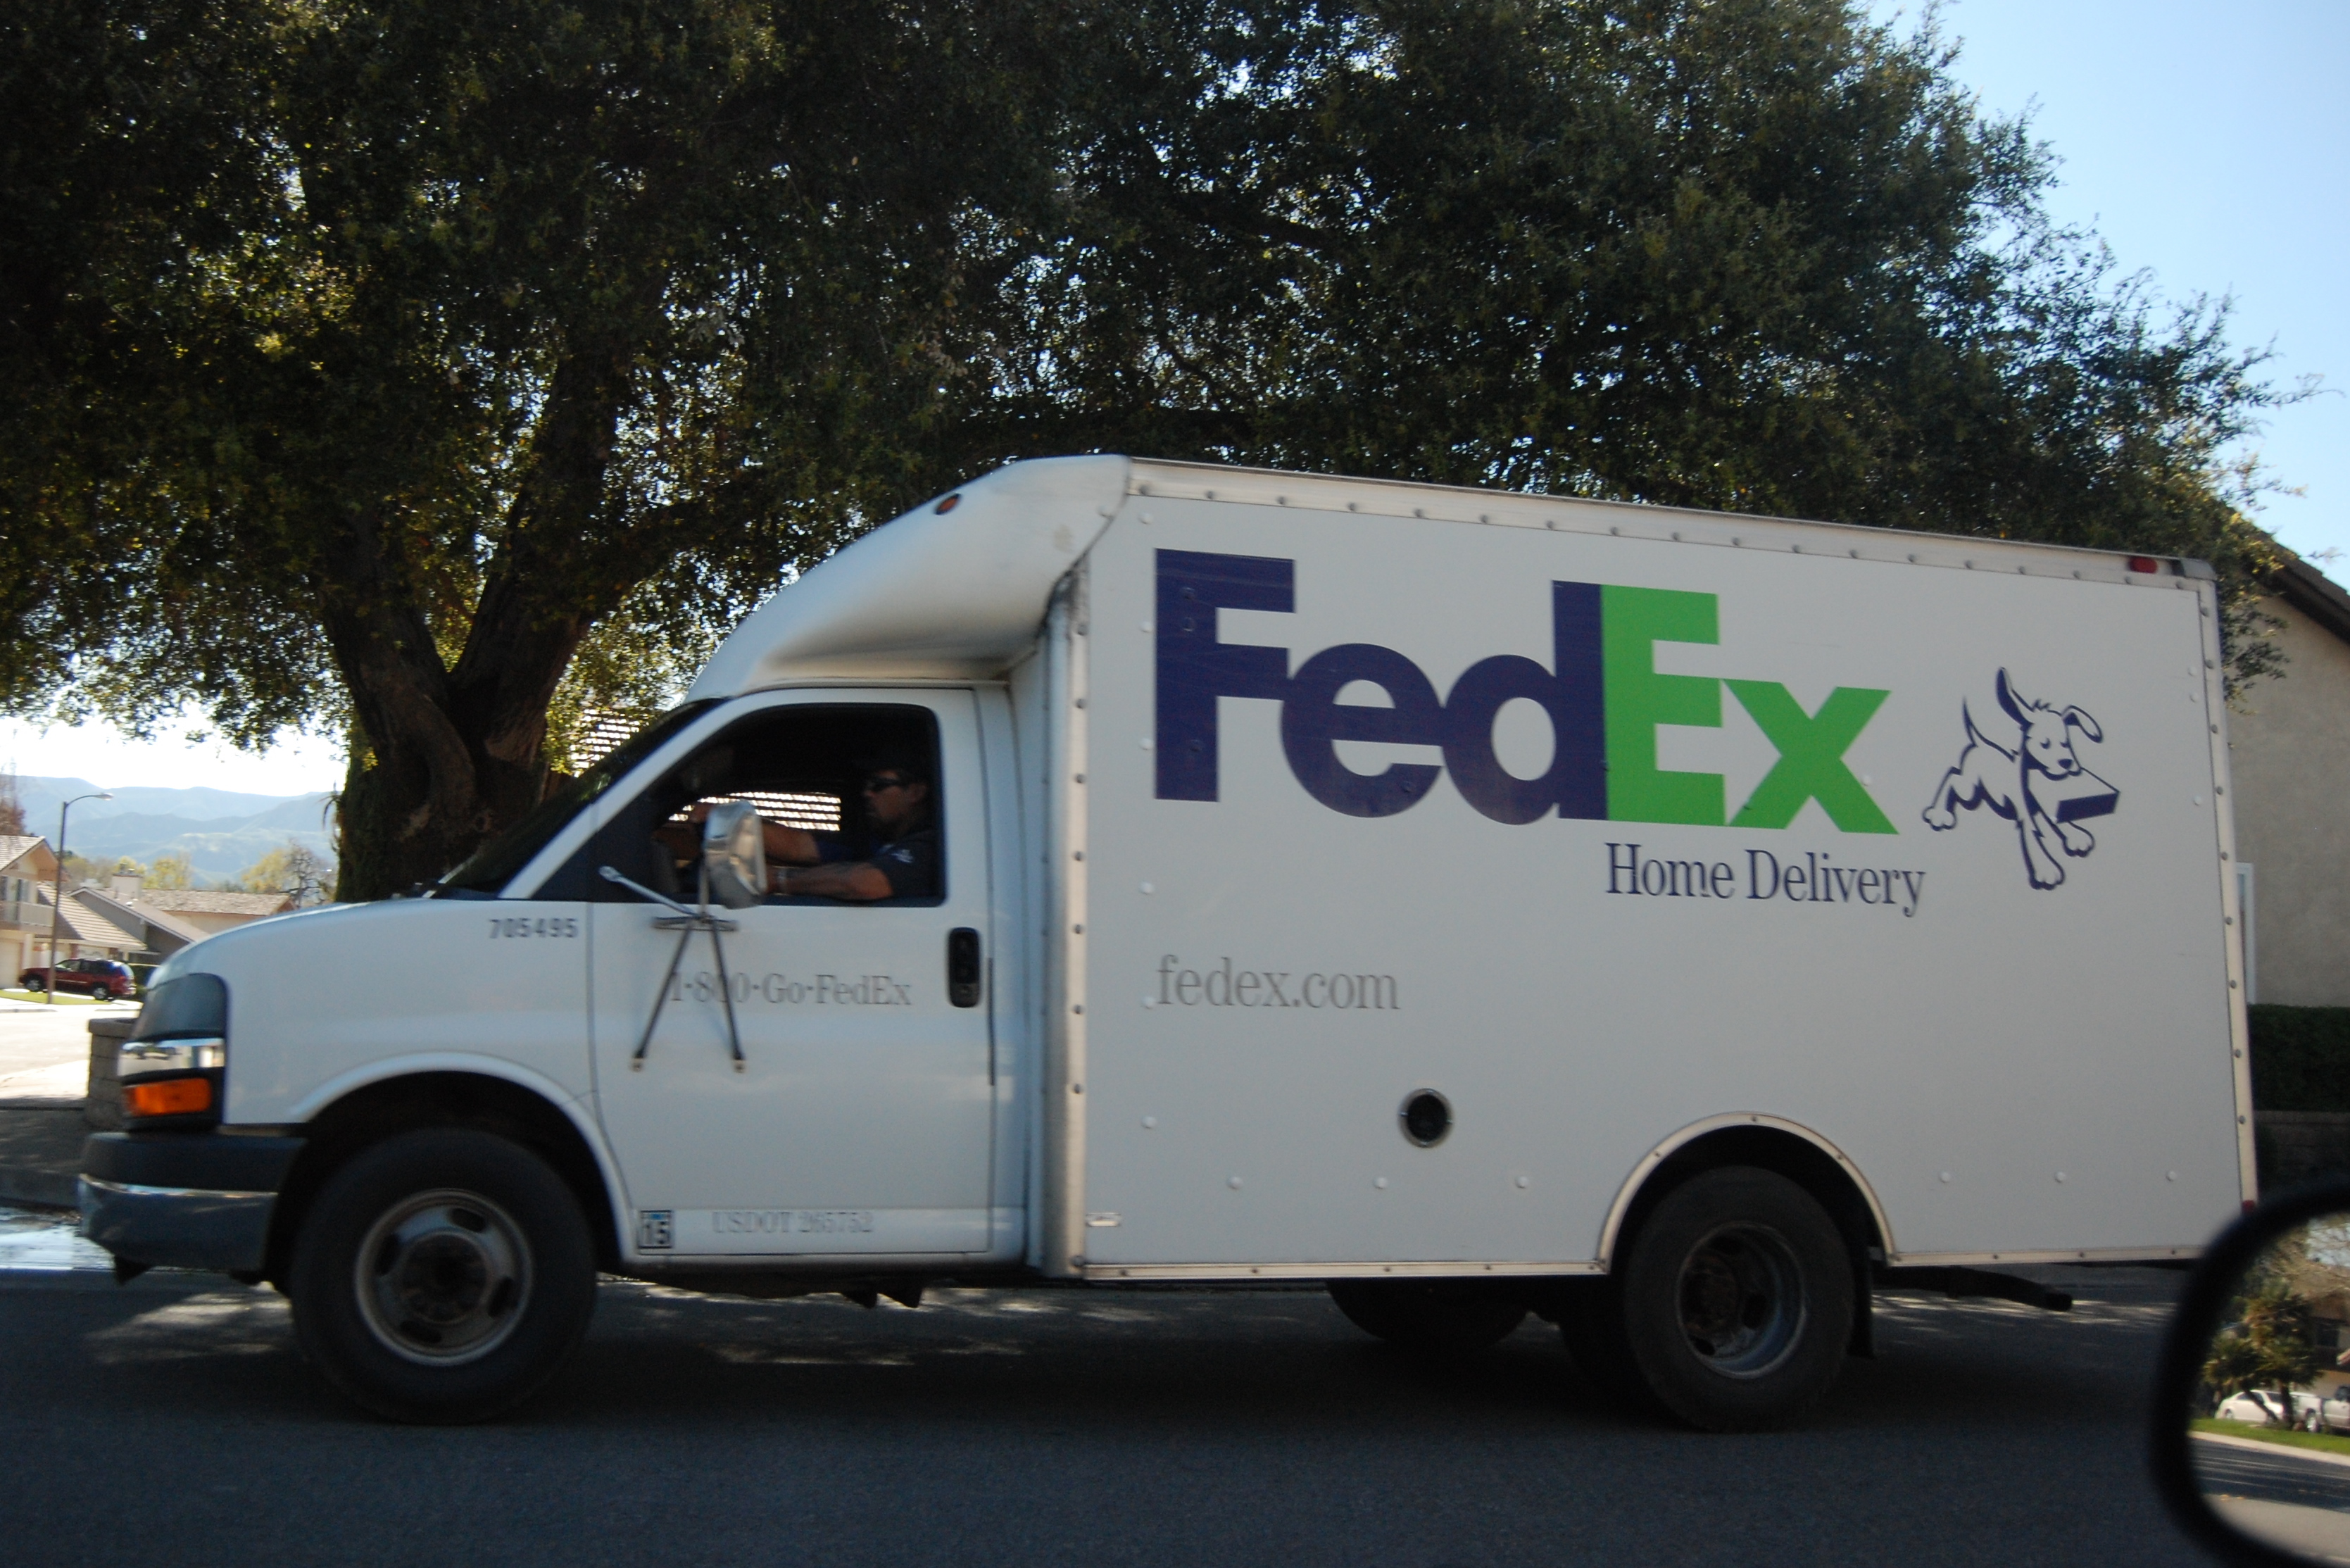 Fedex employee cimberly gets package delivered